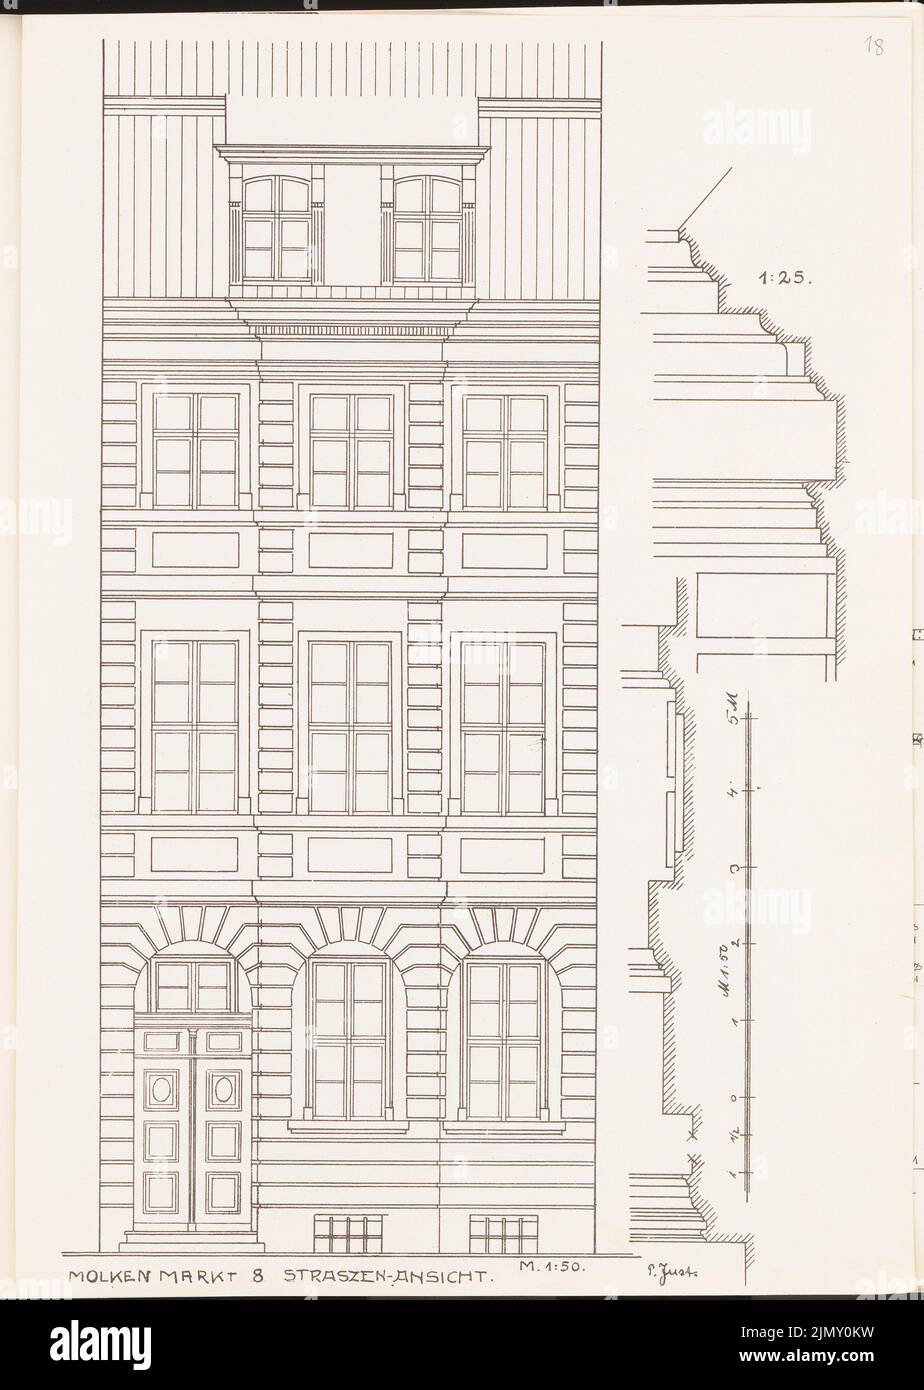 Just P., residential building on Molkenmarkt 8, Berlin. (From: Architecton. Sketches from Alt-Berlin, ed. Akad. Architects Association, H.28, Berlin 1904.) (1904-1904): View from the street side, facade cut vertical. Light pressure on paper, 33.9 x 24.1 cm (including scan edges) Stock Photo